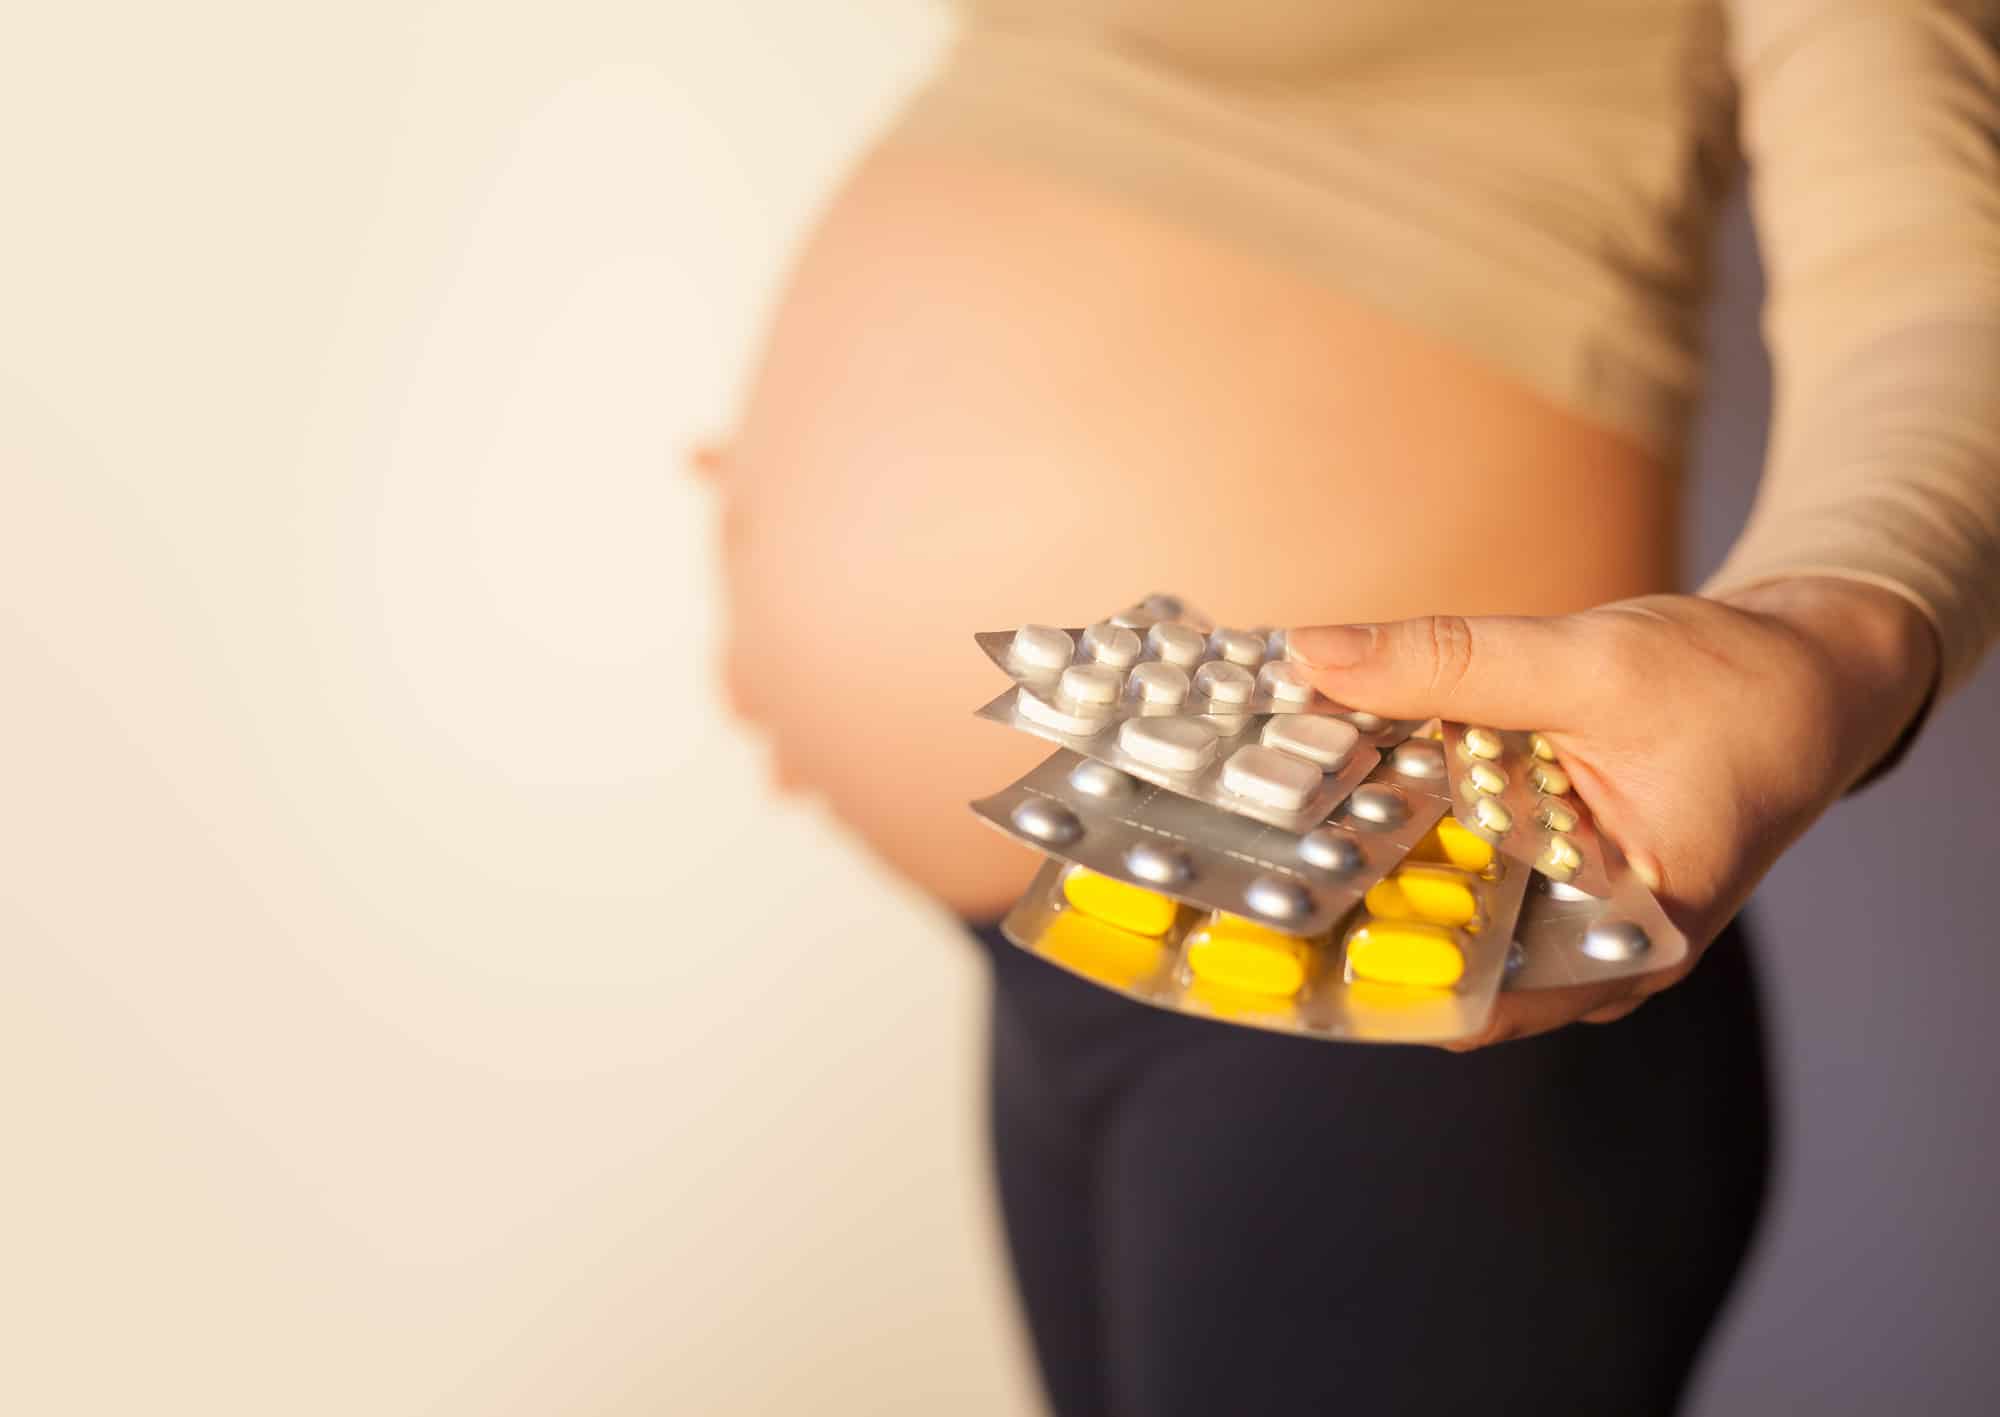 Pregnant woman uses vitamin tablets for healthy nutrition